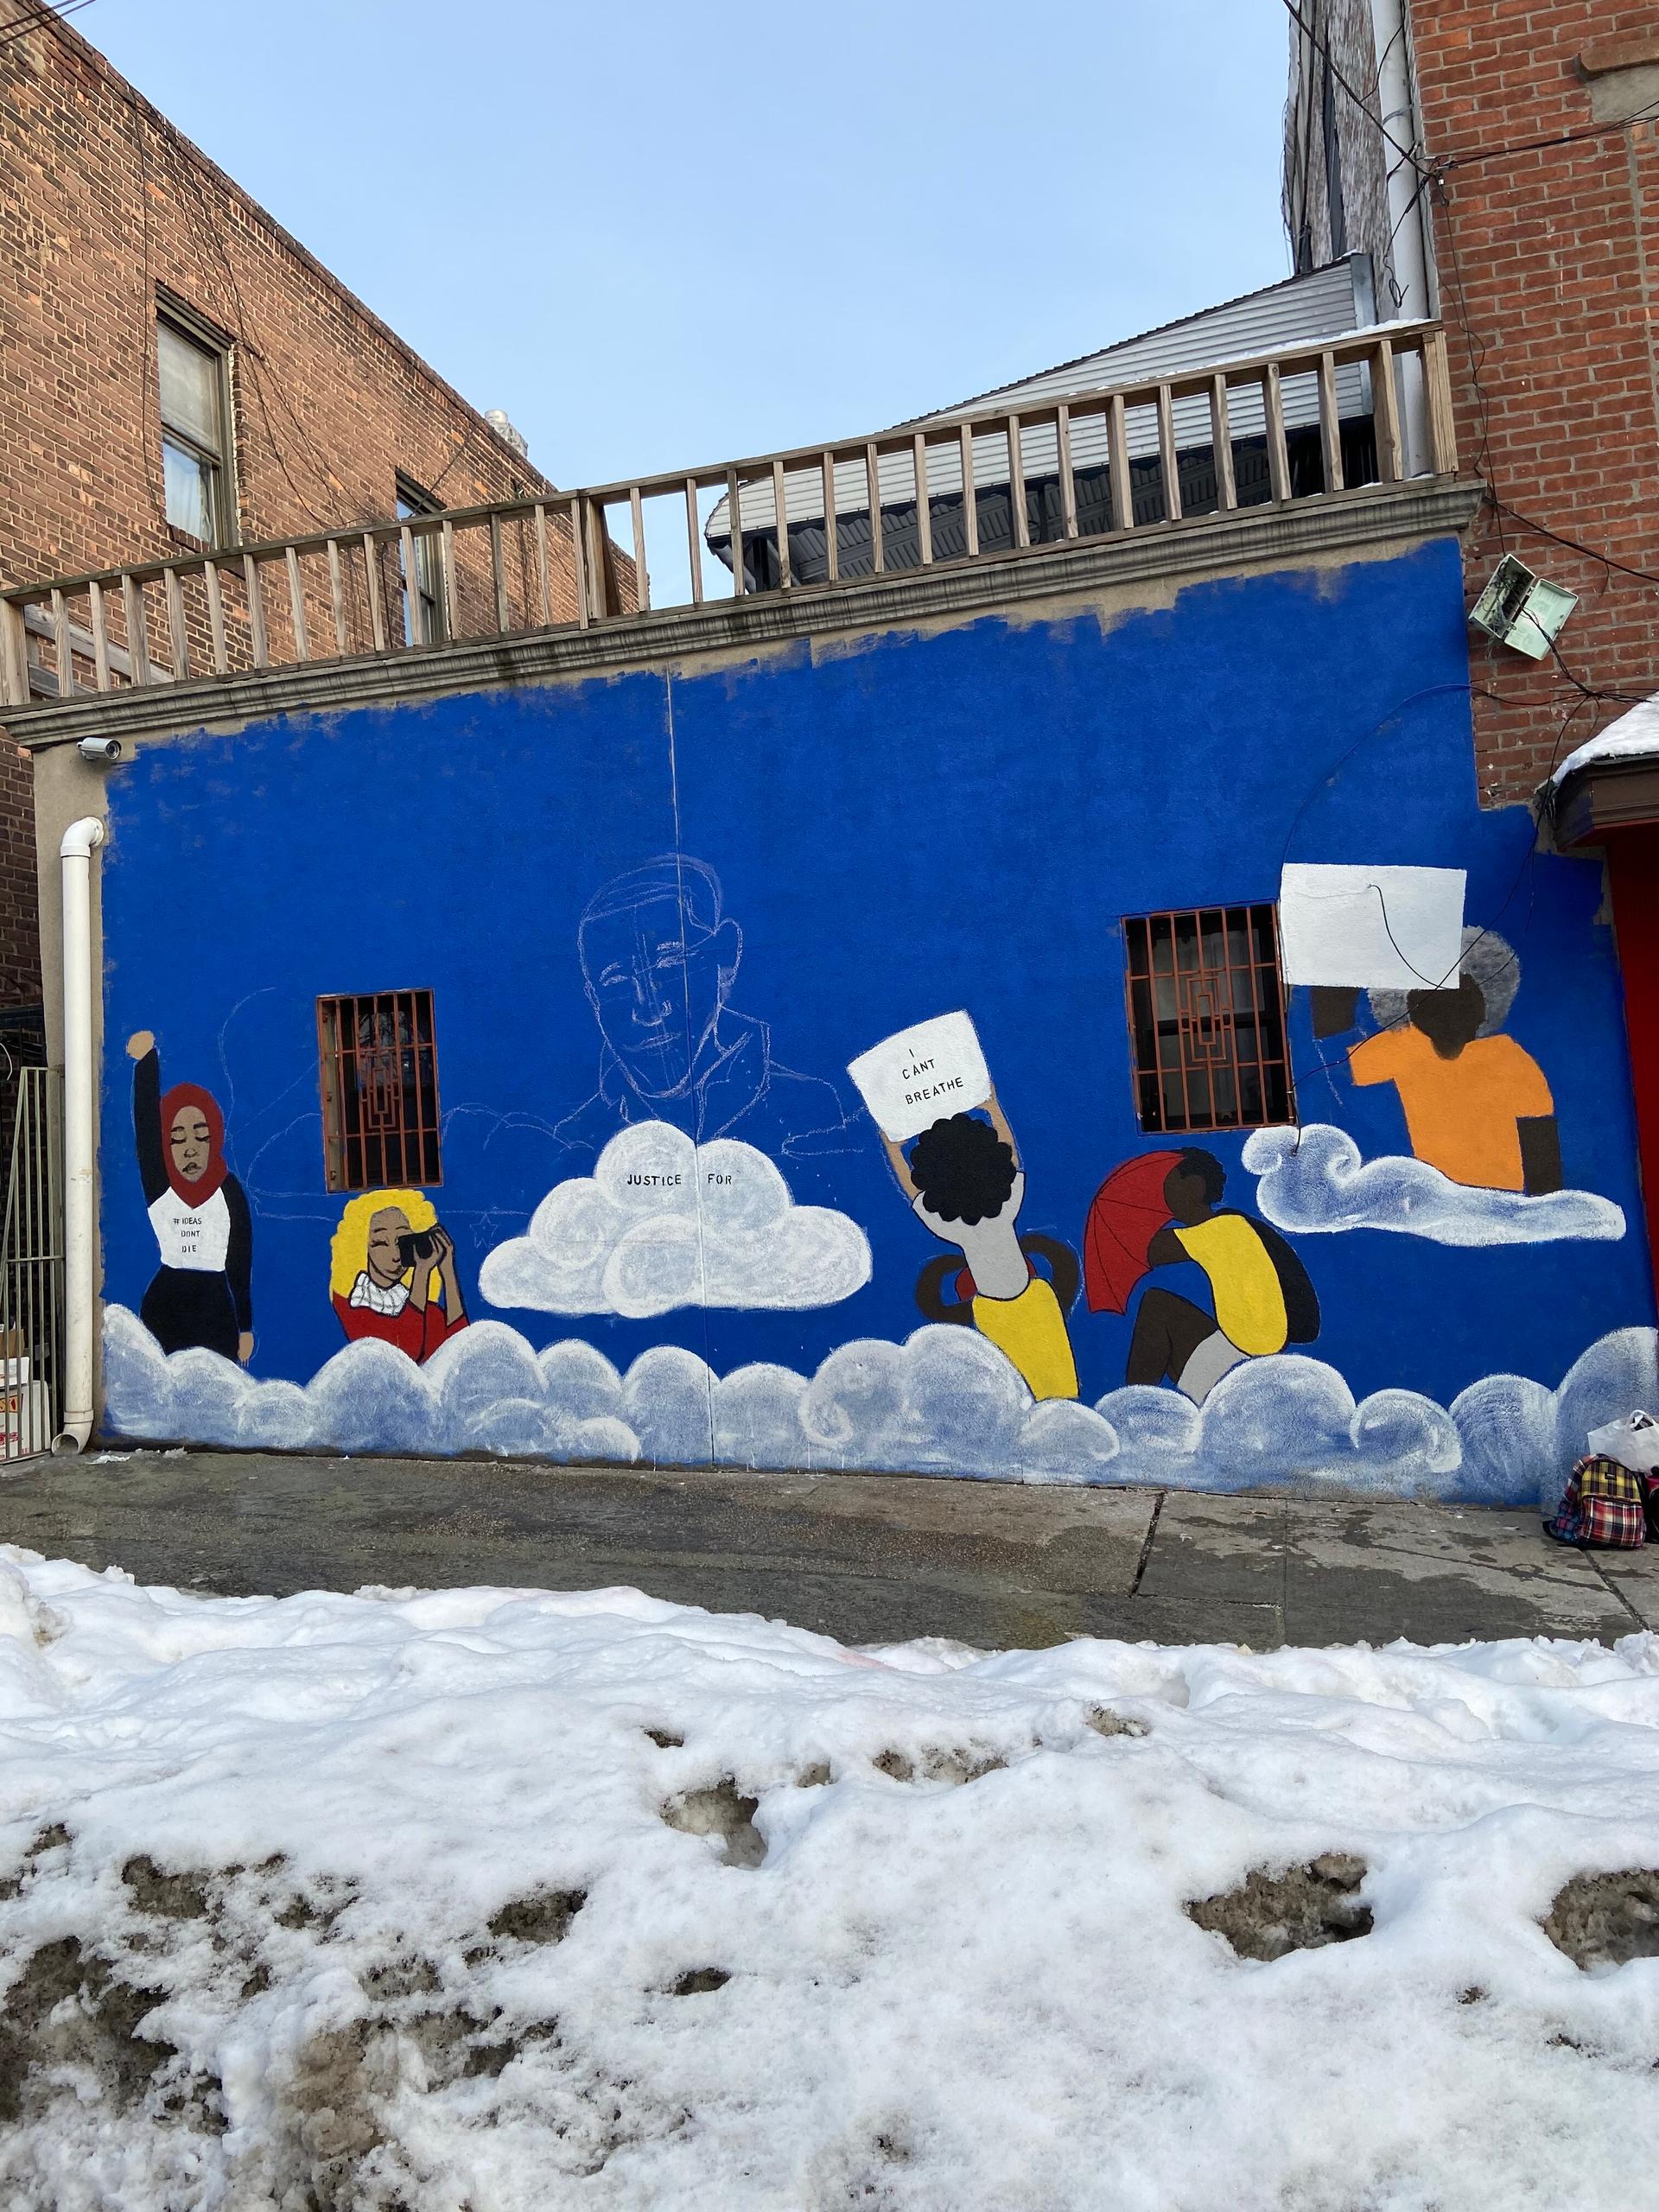 A photo of an unfinished mural in a snowy lot.